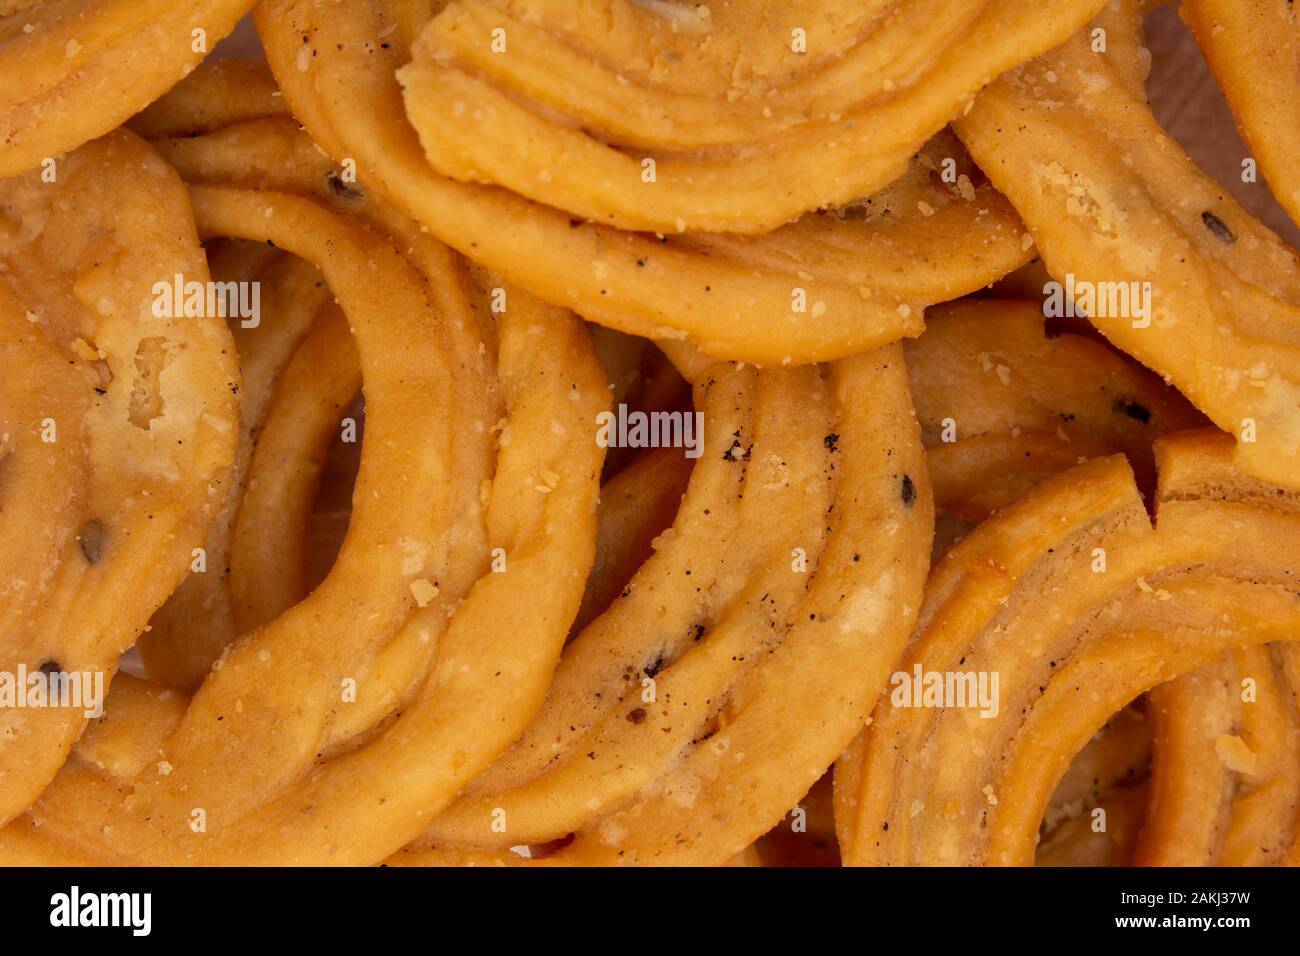 Close view of murukku which is a popular south indian savoury. Indian sweet and savoury prepared during festivals. Stock Photo